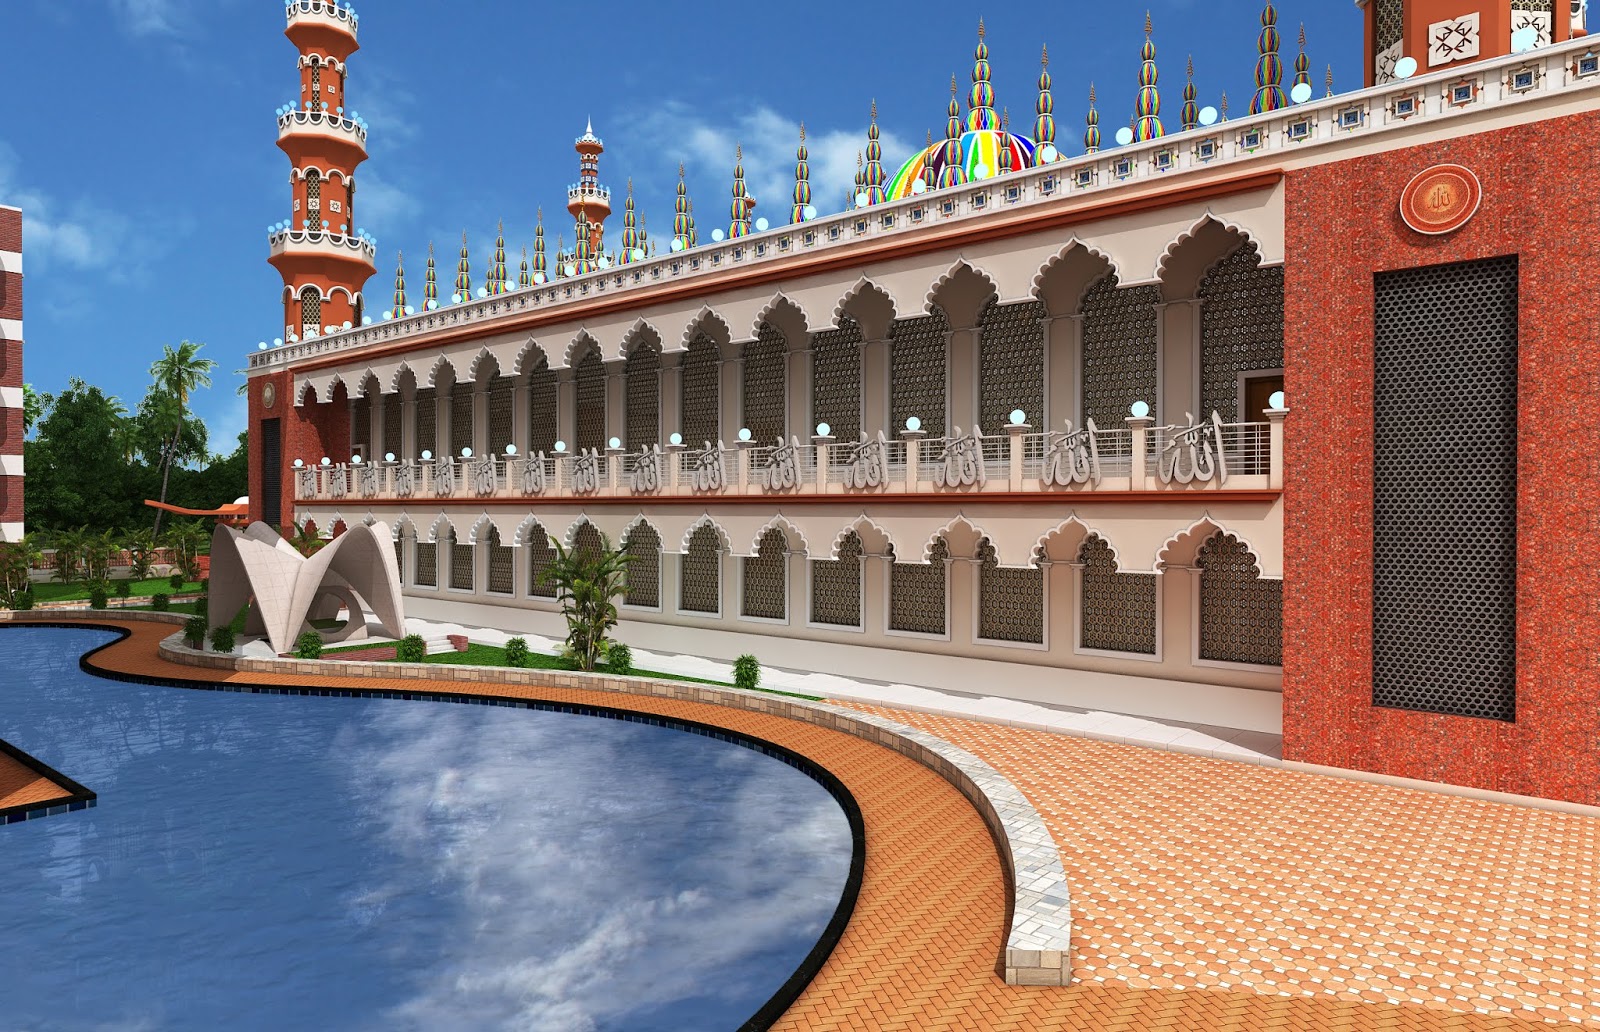 Beautiful Mosque Pictures Download - Mosque Design Pictures - mosjider picture - NeotericIT.com